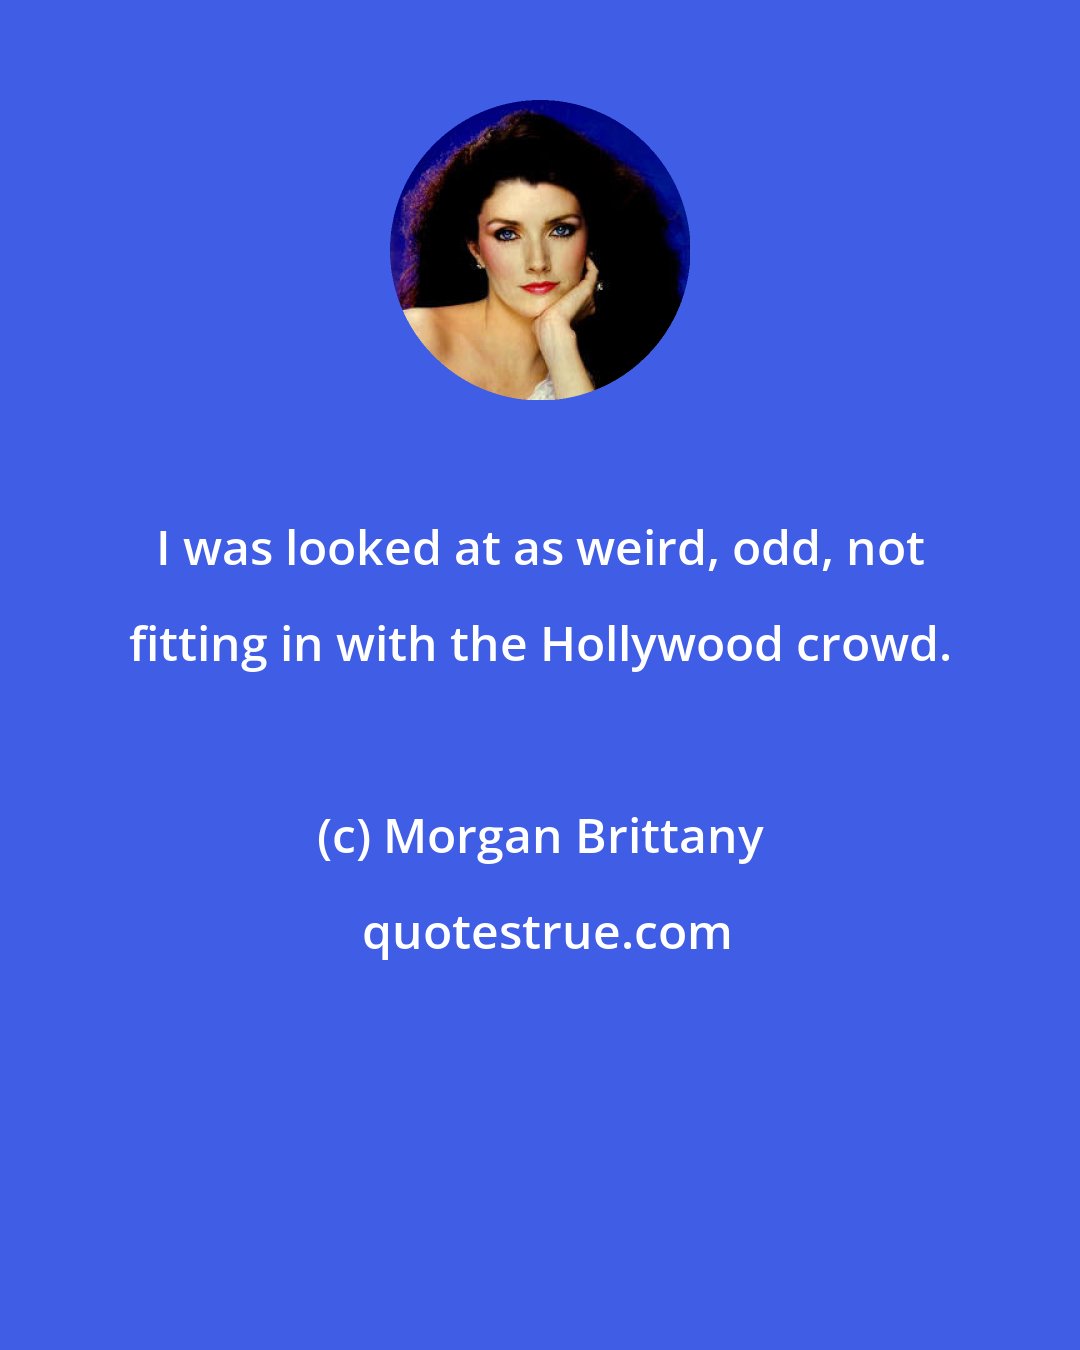 Morgan Brittany: I was looked at as weird, odd, not fitting in with the Hollywood crowd.